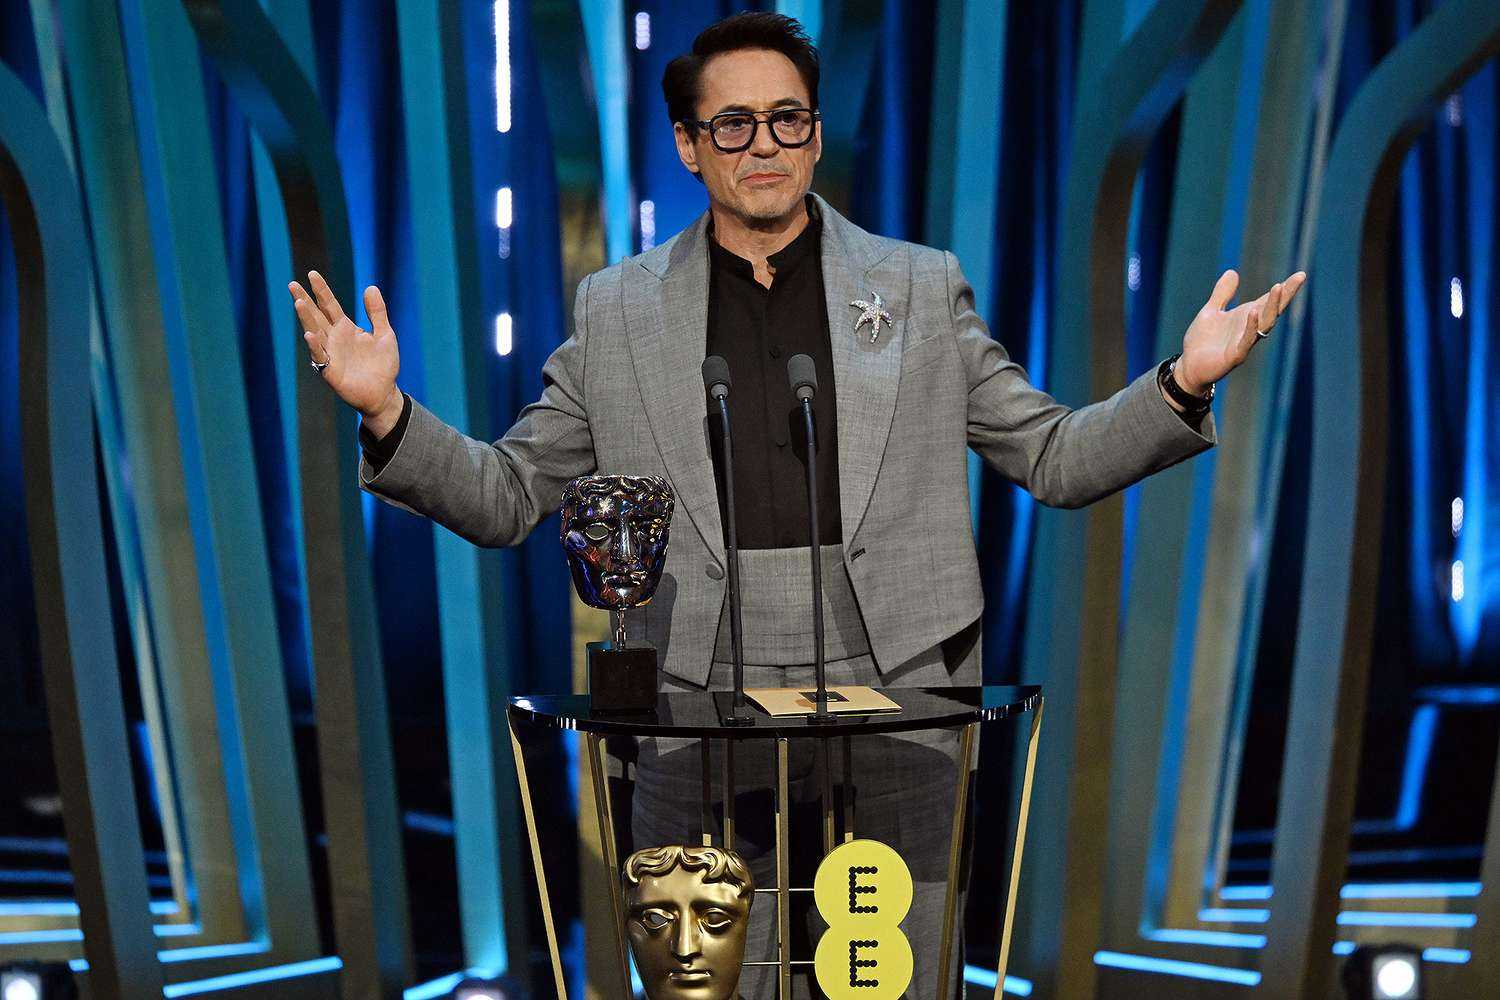 Robert Downey Jr. playfully references his dwindling credibility in supporting actor BAFTA acceptance speech